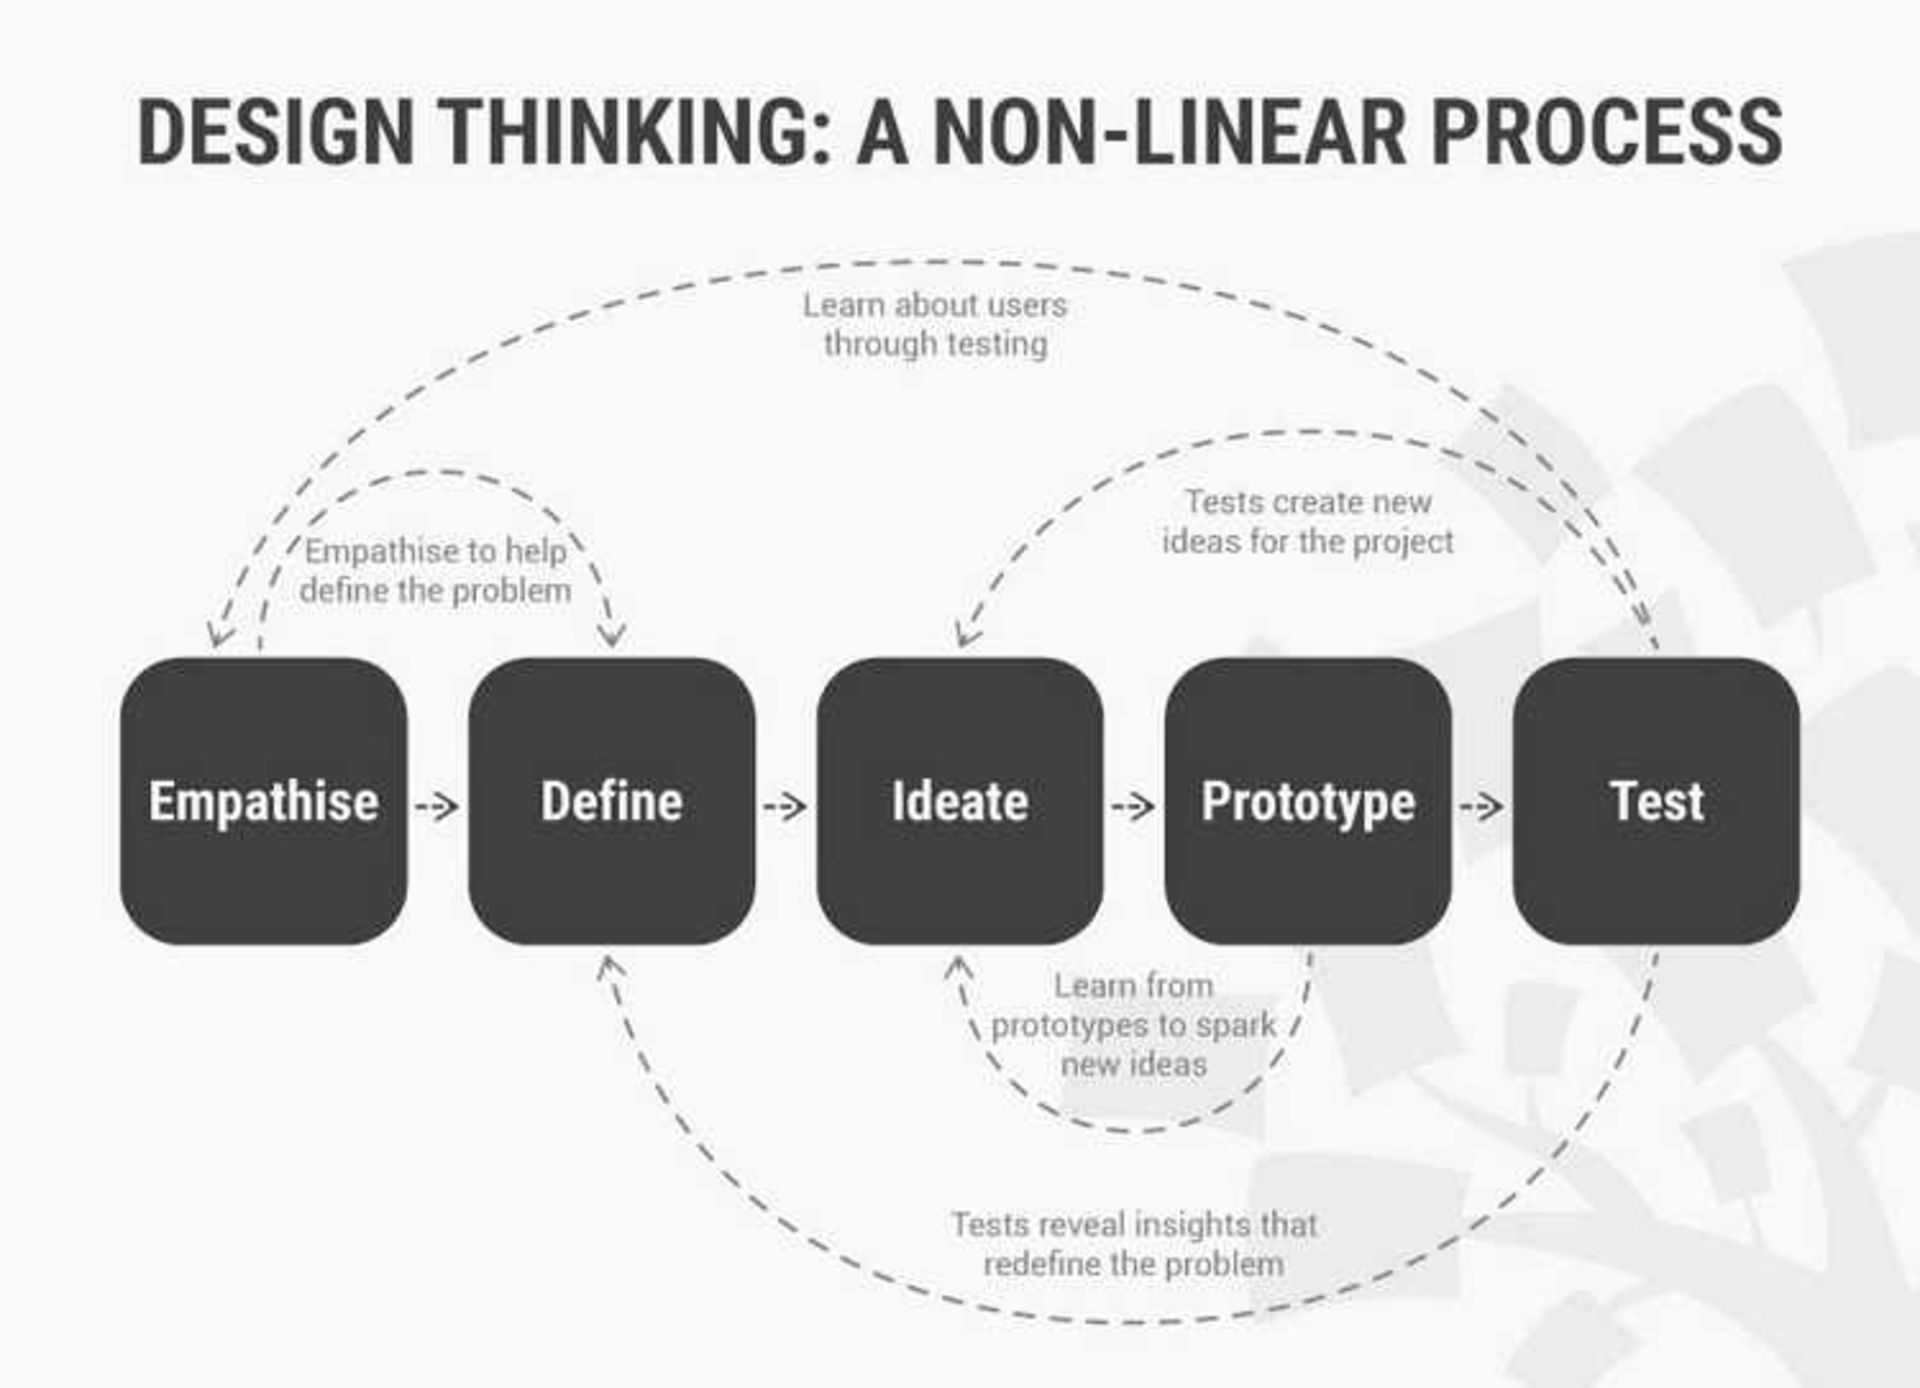 The Non-Linear Nature of Design Thinking